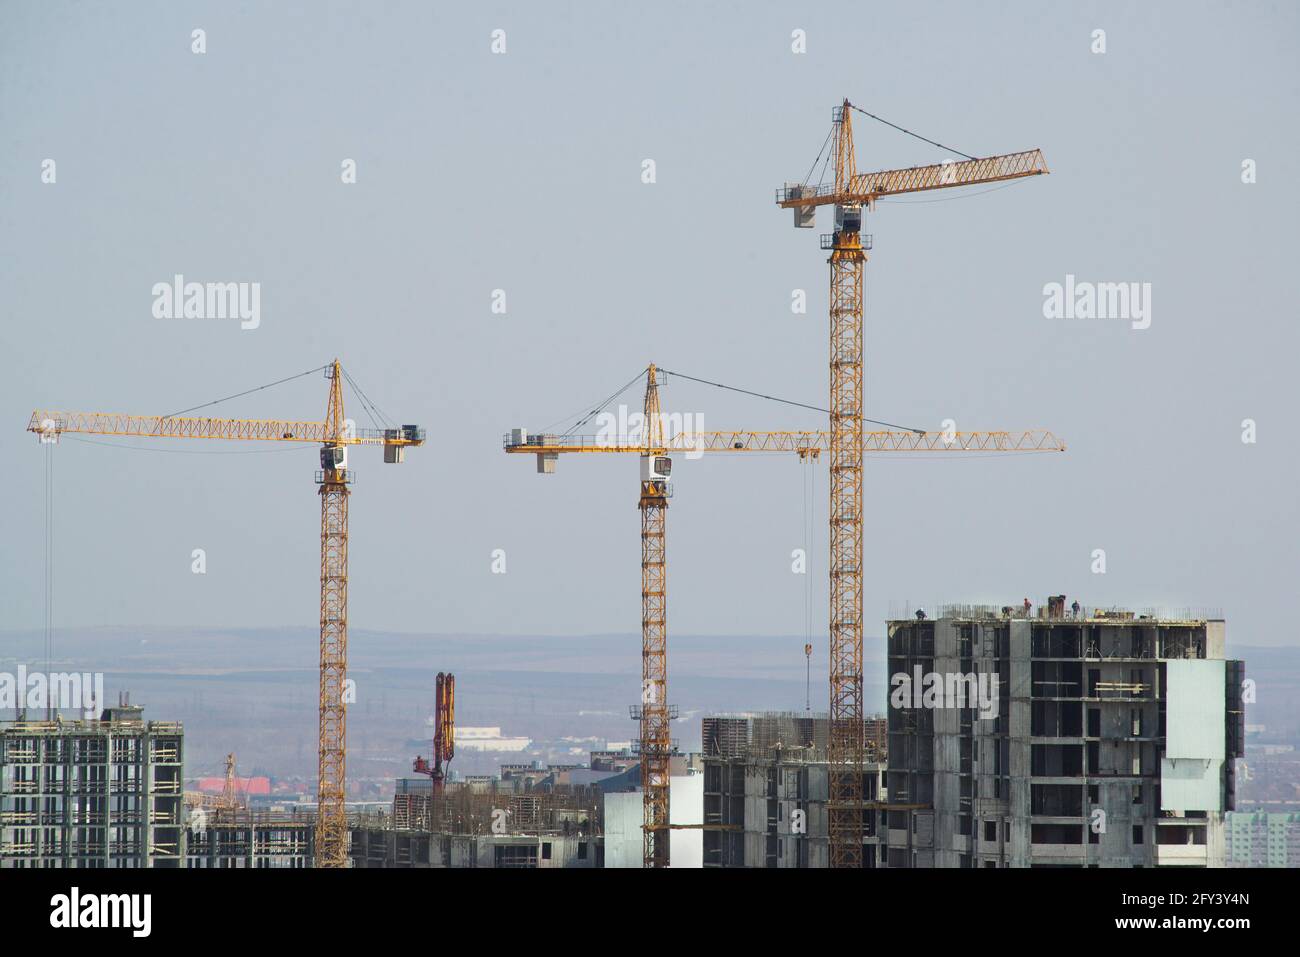 Construction yard of multistory living building with cranes Stock Photo